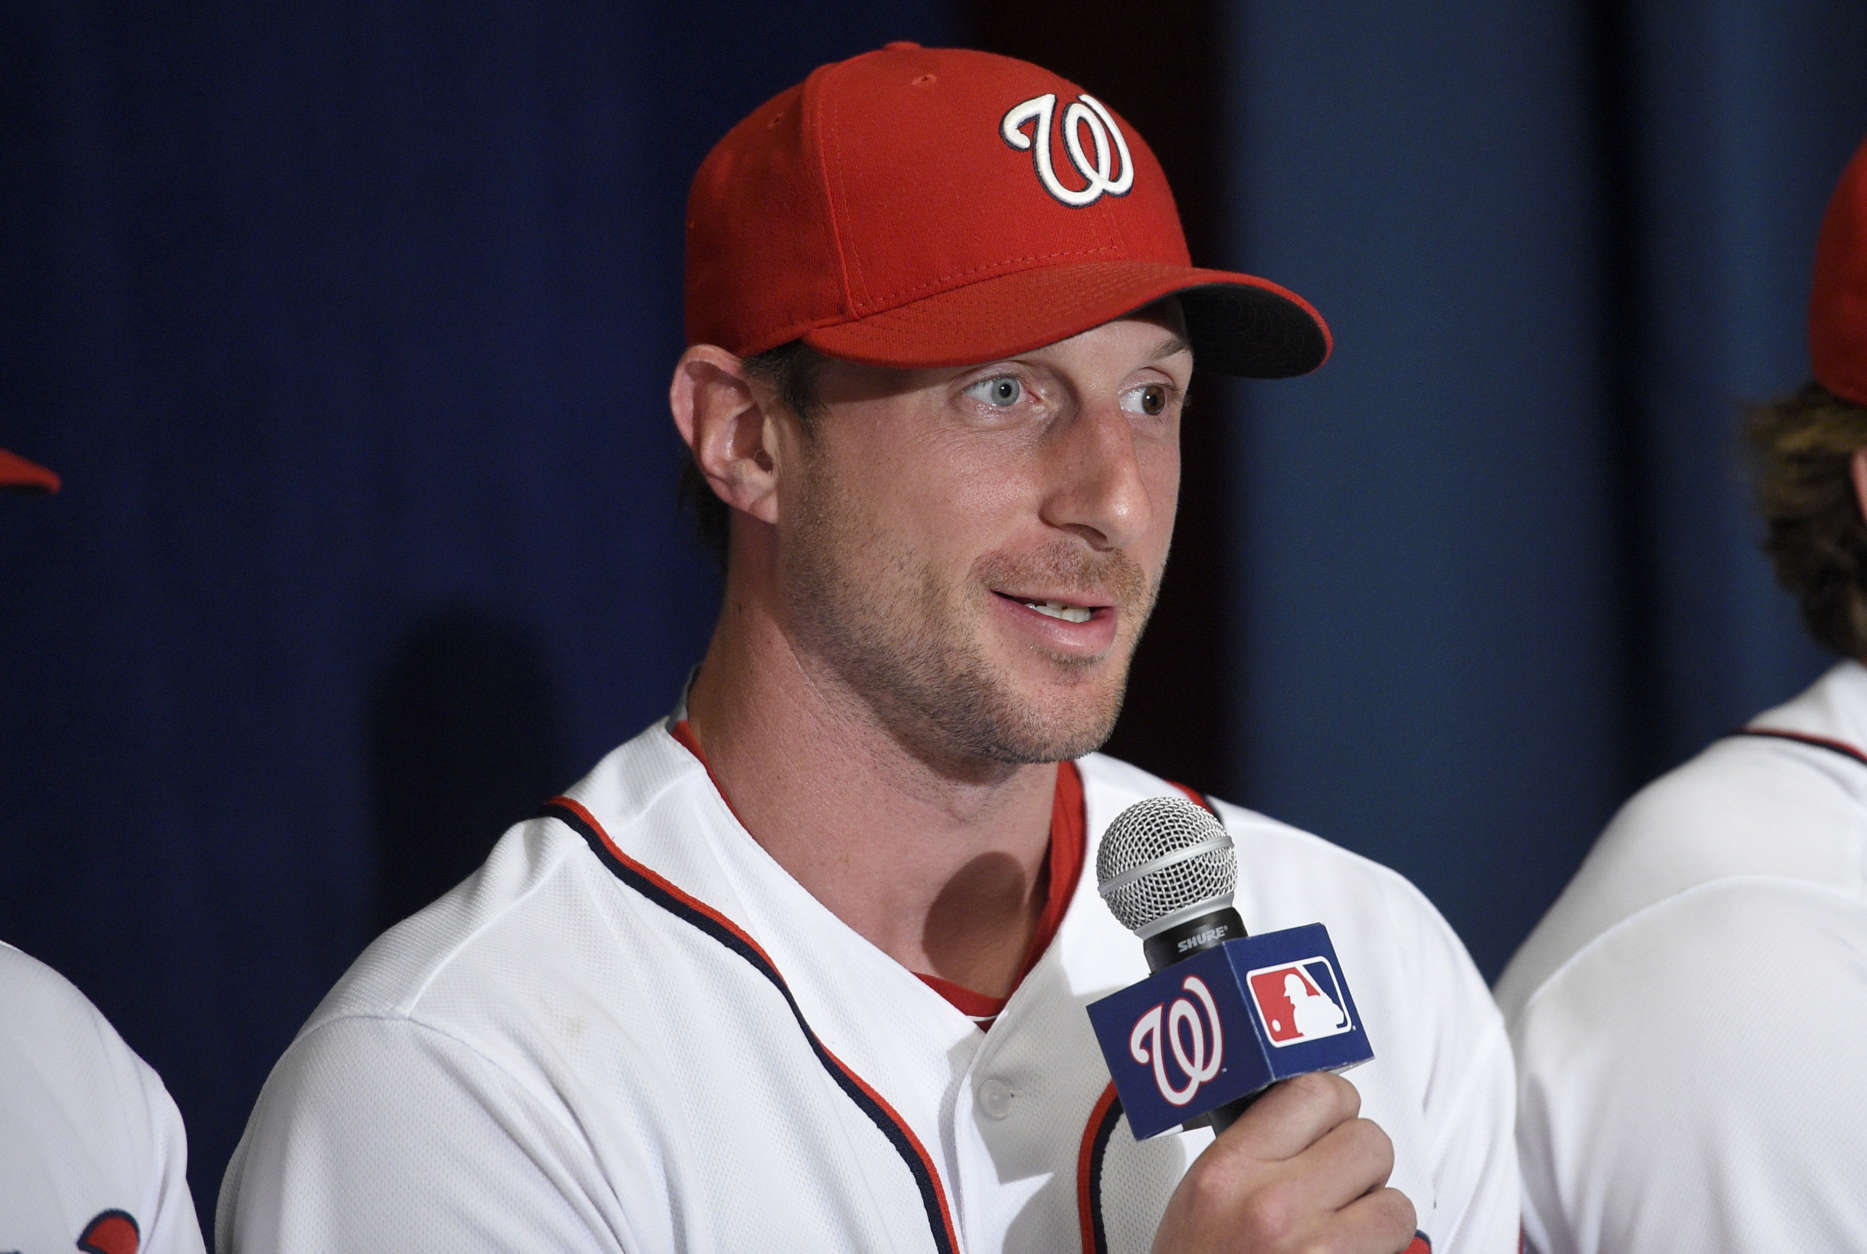 Washington Nationals' Max Scherzer speaks during a baseball press conference to unveil the 2018 MLB All-Star Game logo, Wednesday, July 26, 2017, in Washington. (AP Photo/Nick Wass)